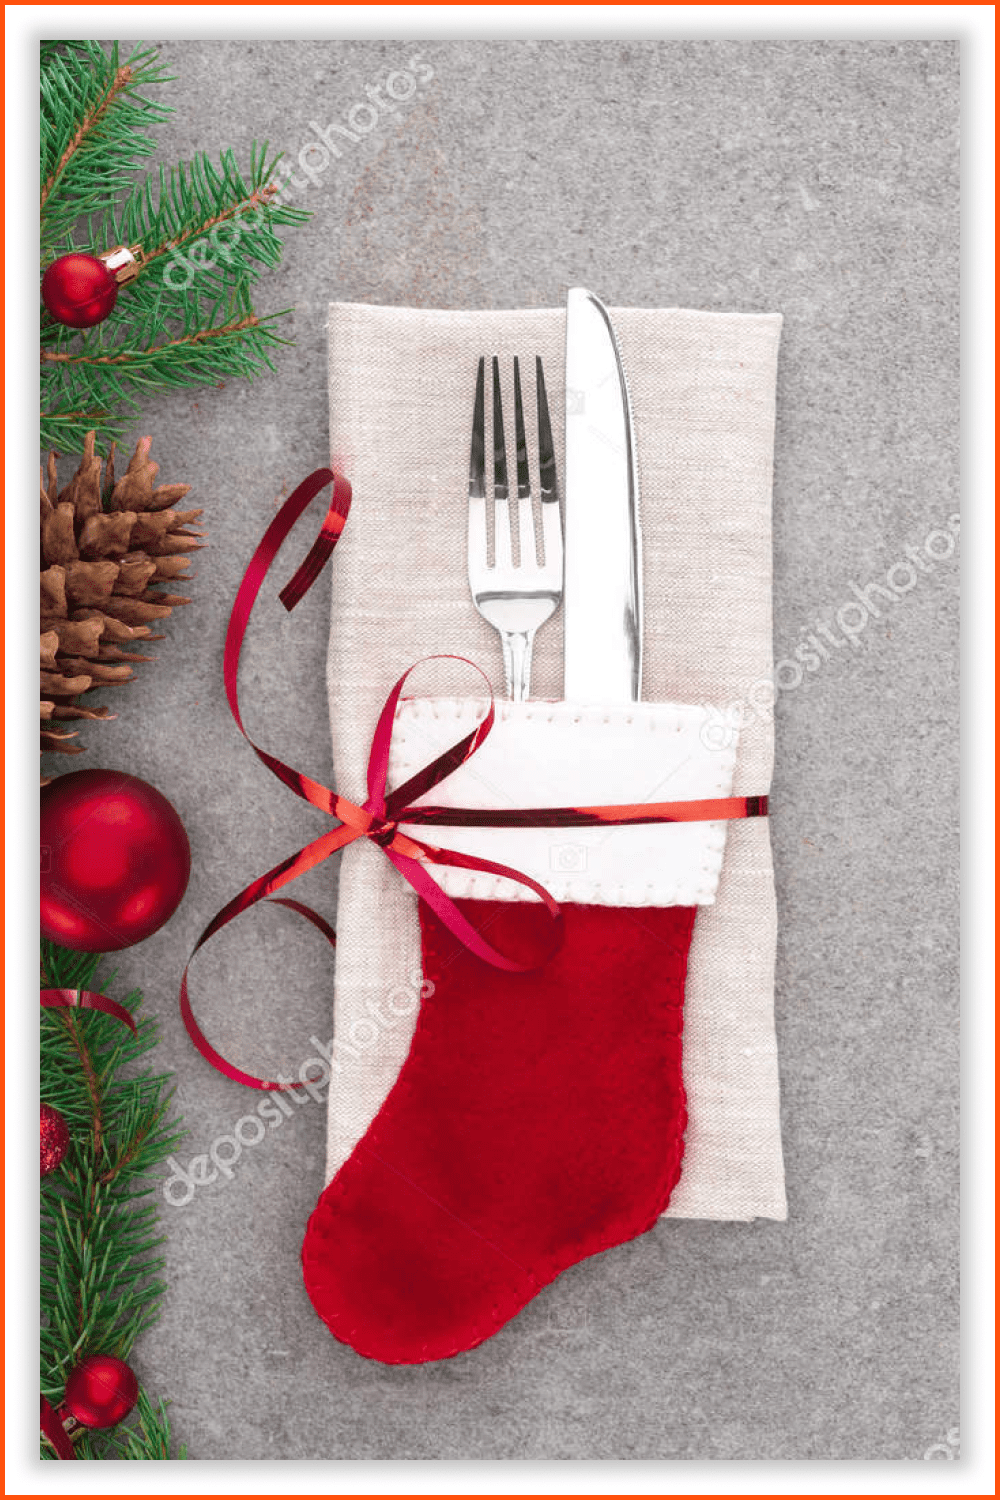 Photo of a gift red sock with a fork and knife in it.